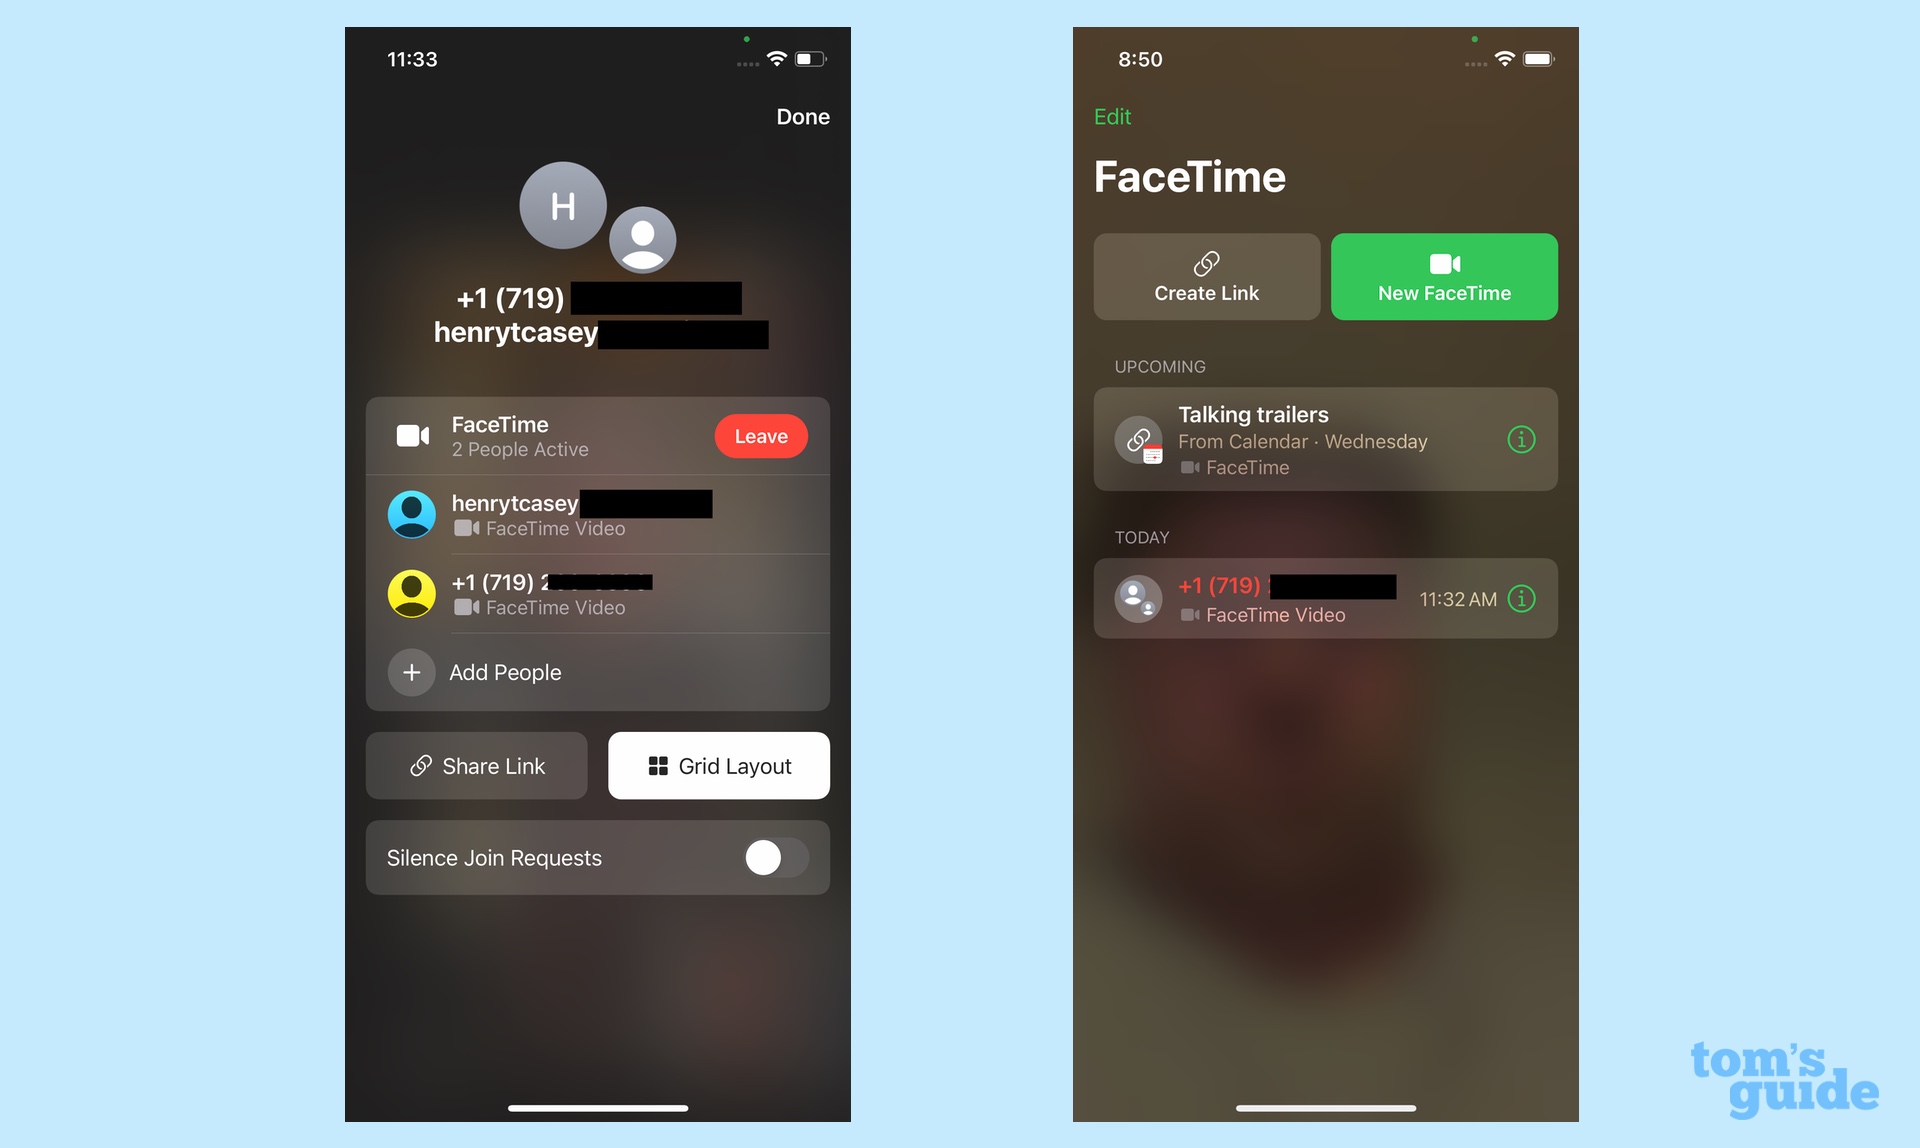 ios 15 includes video and audio improvements for FaceTime plus scheduling features